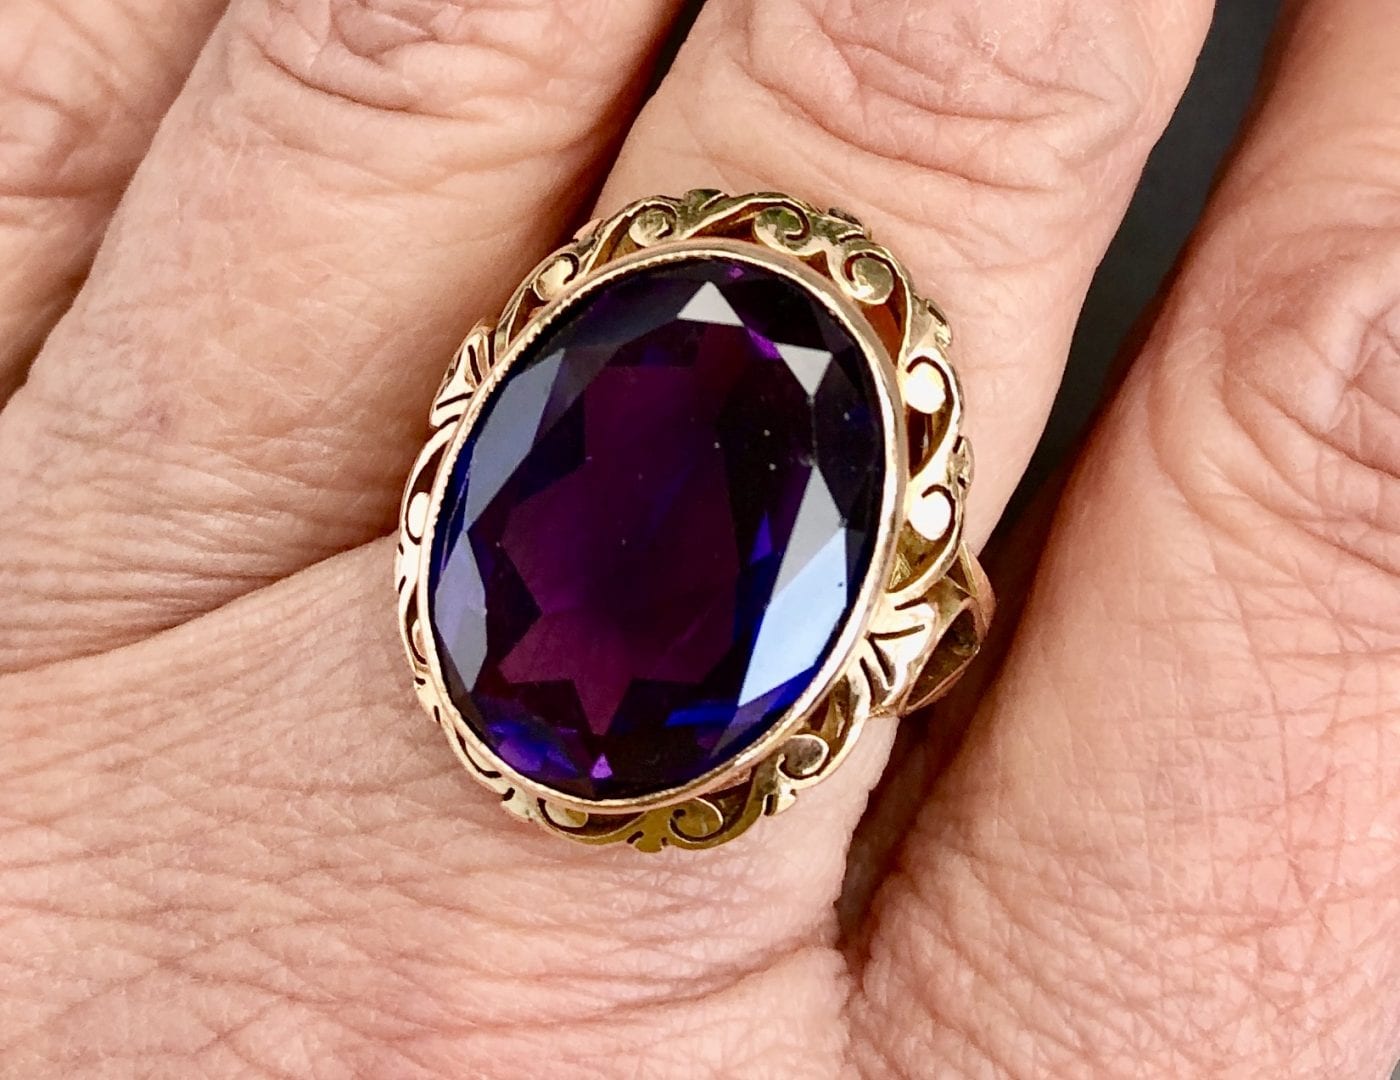 Antique Alexandrite Diamond Gold Snake Ring Ref: 552384 - Antique Jewelry |  Vintage Rings | Faberge EggsAntique Jewelry | Vintage Rings | Faberge Eggs